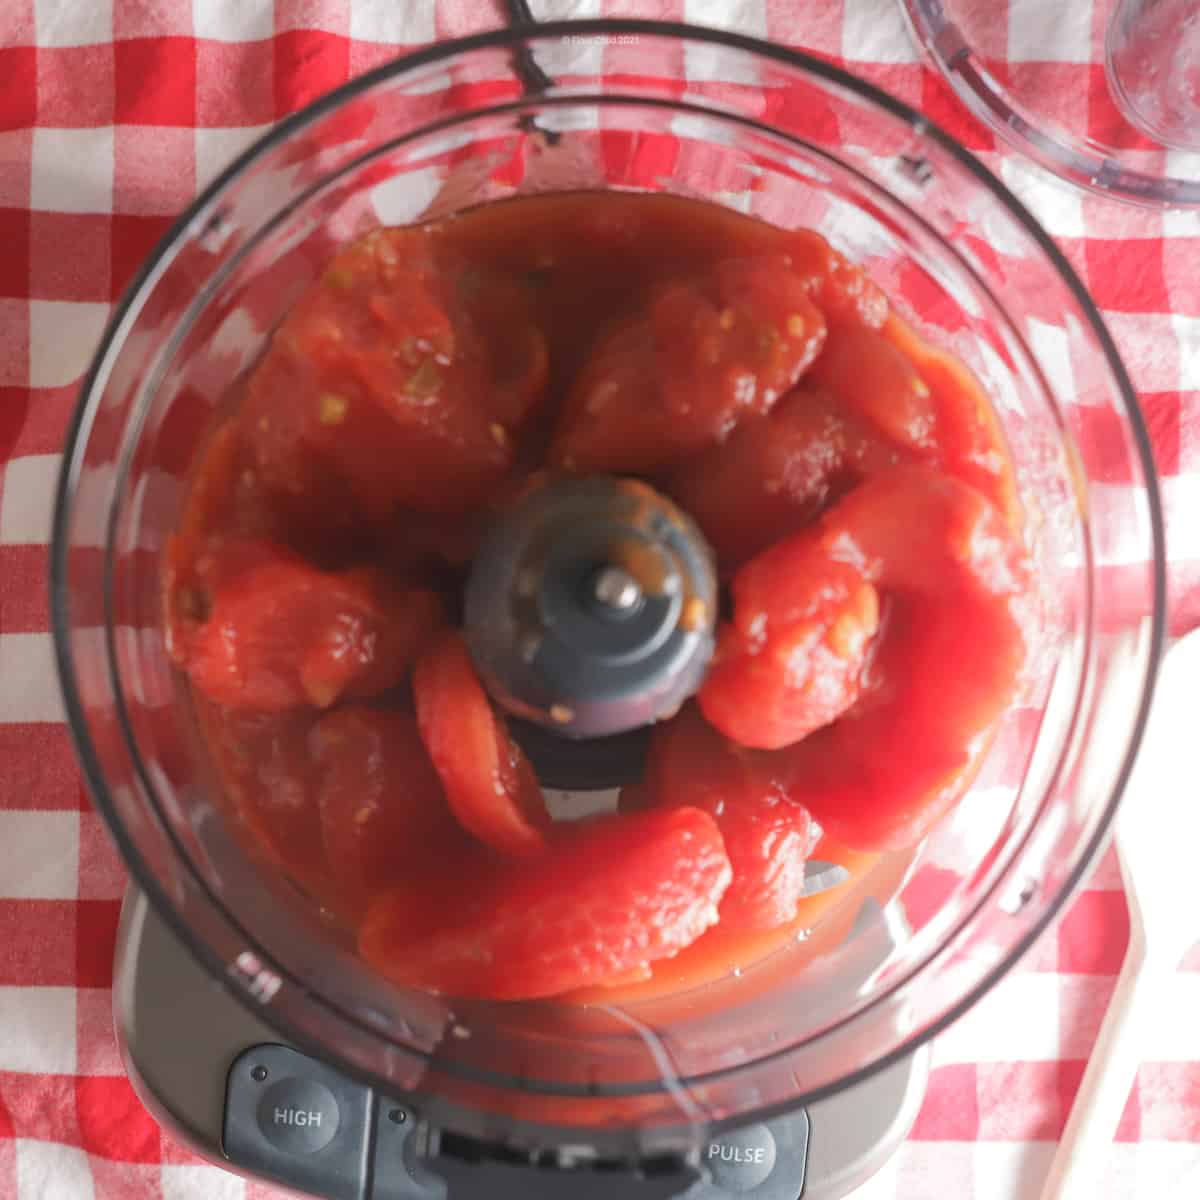 Whole stewed tomatoes inside a food processor